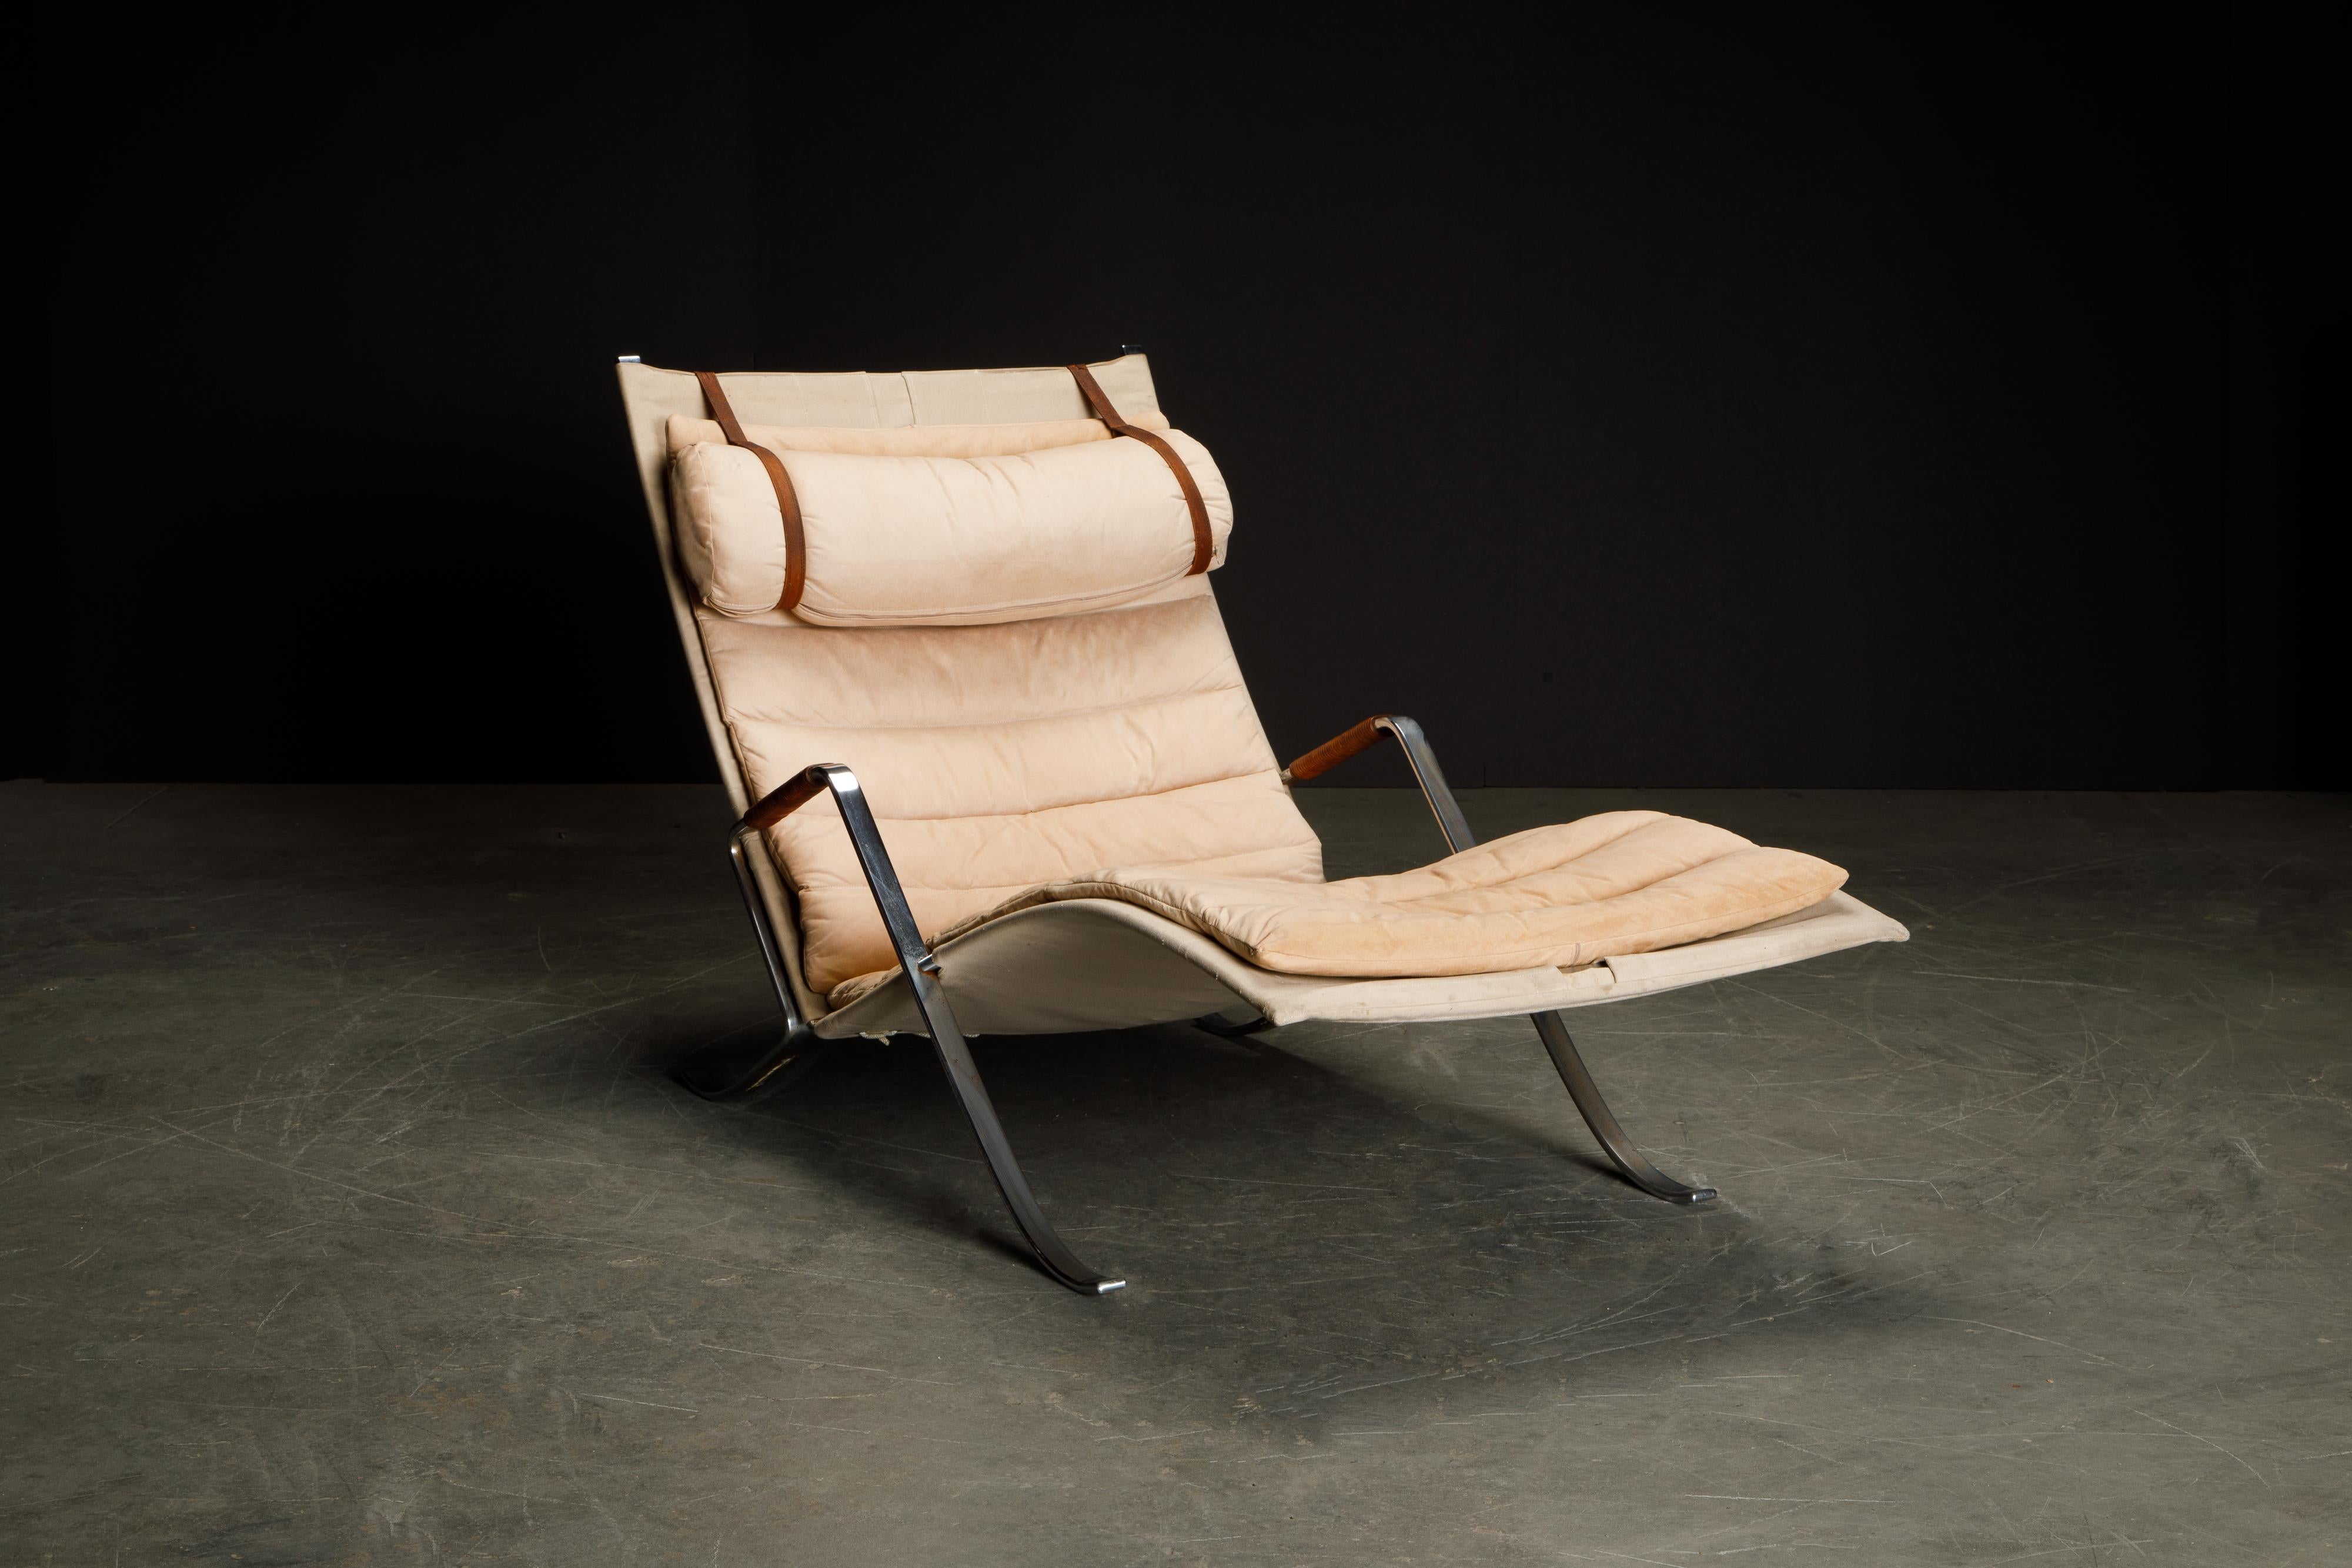 This rare collectors example of the FK-87 Grasshopper chaise lounge by Preben Fabricius & Jorgen Kastholm for Alfred Kill international is from the original production years (1960s) and not the recent reproductions by Lange making this a